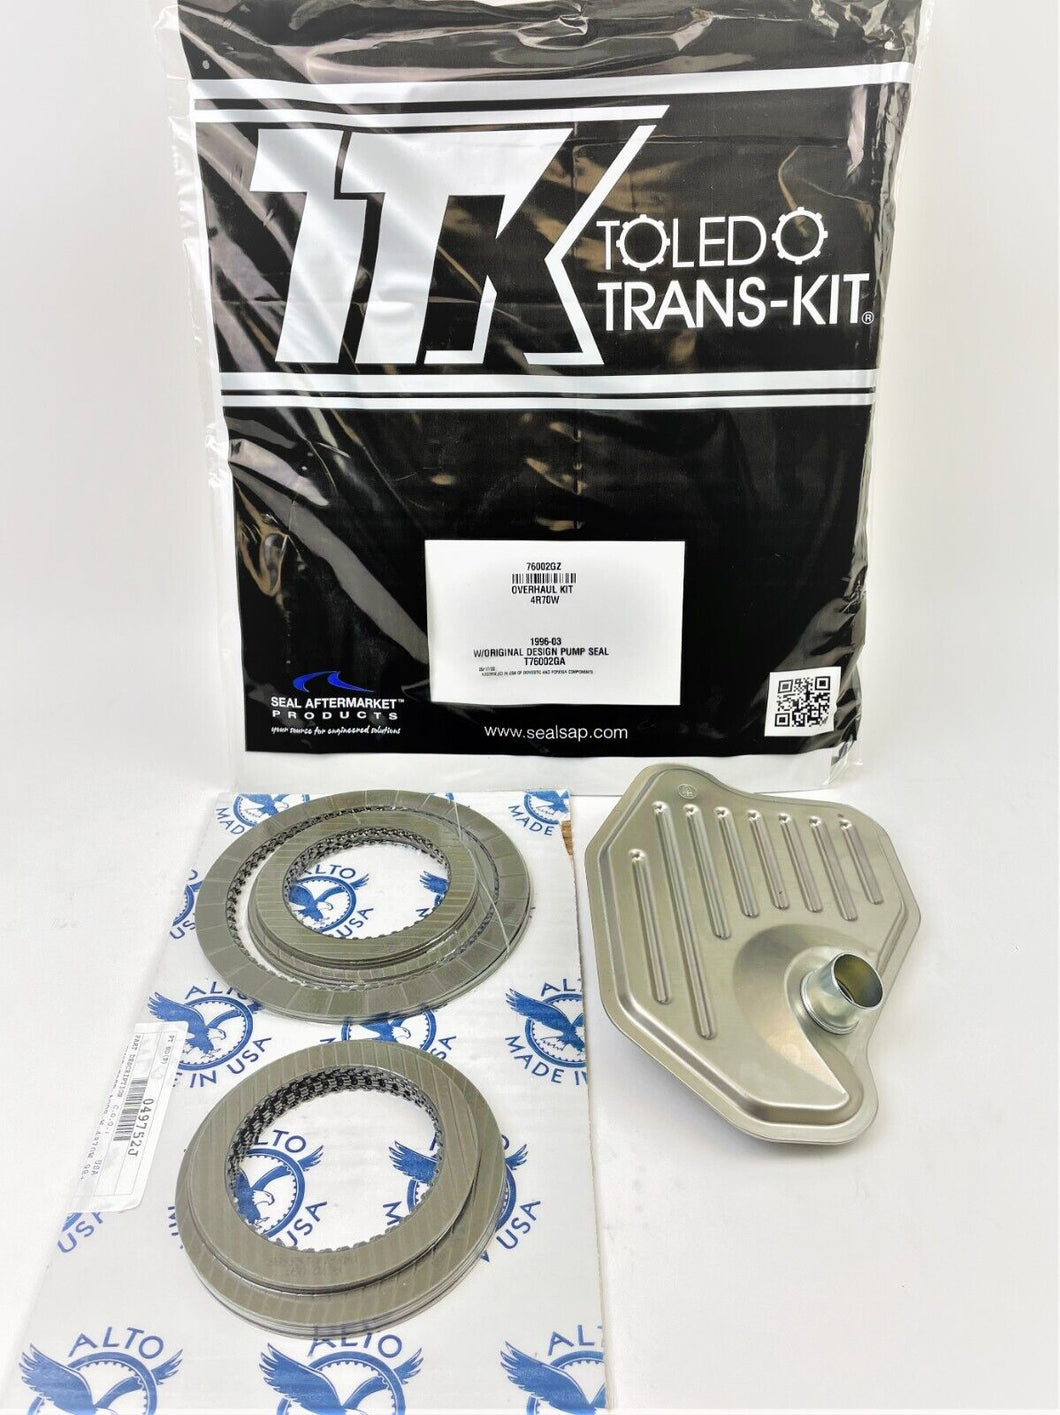 4R70W TRANSMISSION REBUILD KIT 1996-2003 with Alto Clutches and Filter